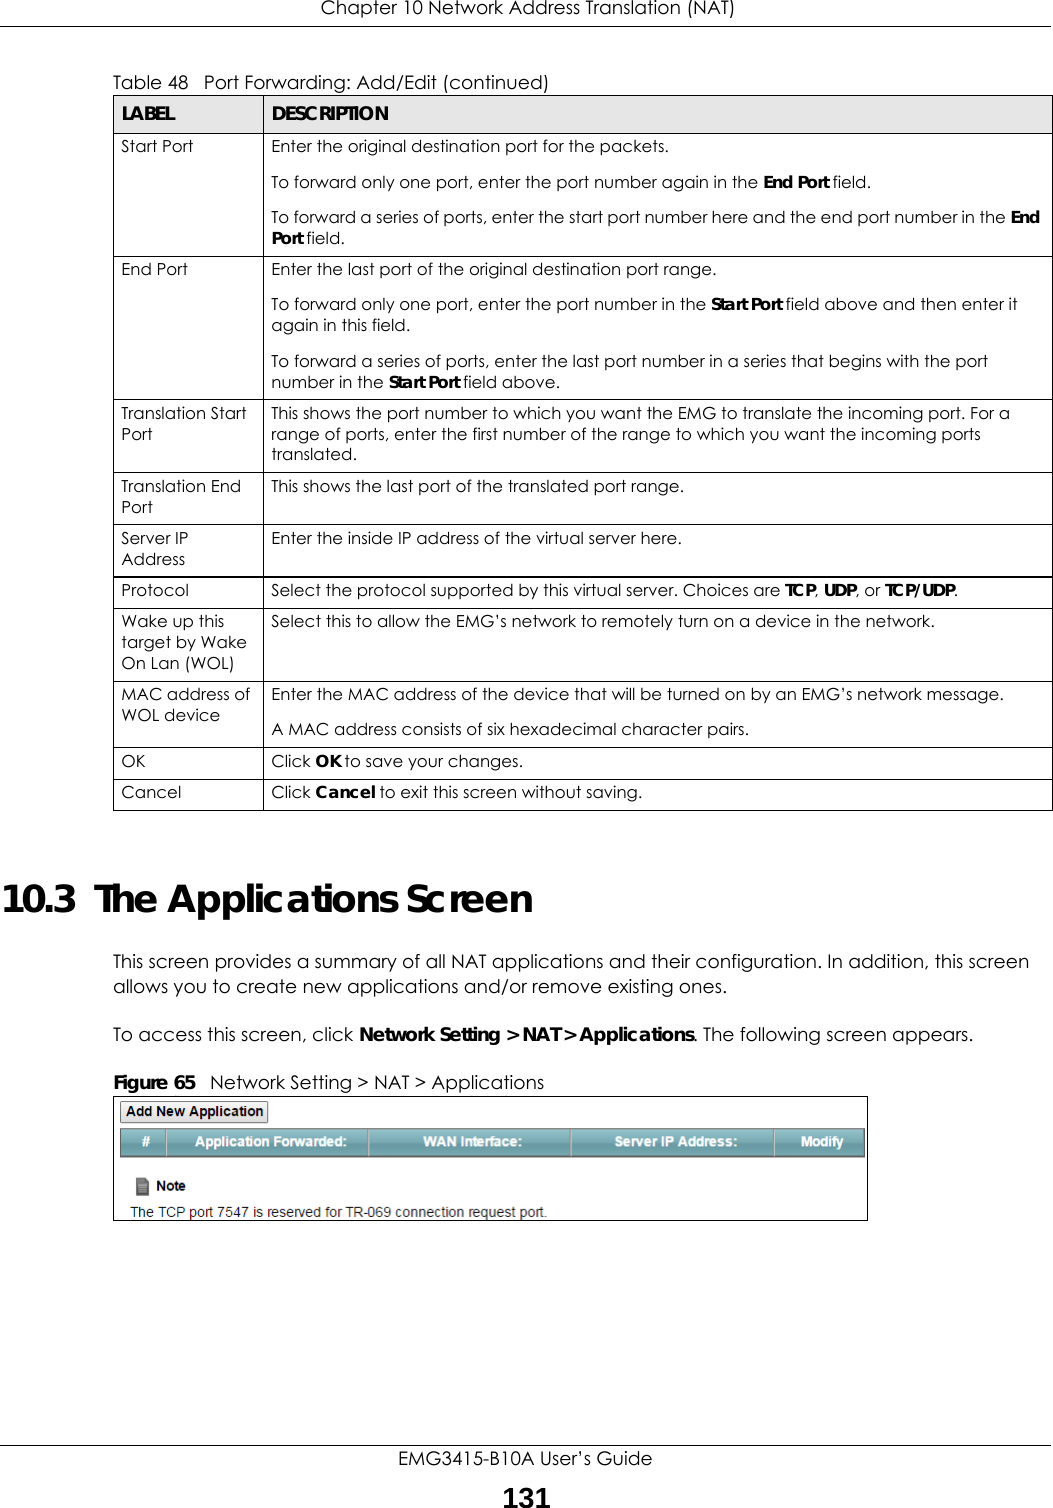  Chapter 10 Network Address Translation (NAT)EMG3415-B10A User’s Guide13110.3  The Applications ScreenThis screen provides a summary of all NAT applications and their configuration. In addition, this screen allows you to create new applications and/or remove existing ones.To access this screen, click Network Setting &gt; NAT &gt; Applications. The following screen appears.Figure 65   Network Setting &gt; NAT &gt; ApplicationsStart Port Enter the original destination port for the packets.To forward only one port, enter the port number again in the End Port field. To forward a series of ports, enter the start port number here and the end port number in the End Port field.End Port  Enter the last port of the original destination port range. To forward only one port, enter the port number in the Start Port field above and then enter it again in this field. To forward a series of ports, enter the last port number in a series that begins with the port number in the Start Port field above.Translation Start PortThis shows the port number to which you want the EMG to translate the incoming port. For a range of ports, enter the first number of the range to which you want the incoming ports translated.Translation End Port This shows the last port of the translated port range.Server IP AddressEnter the inside IP address of the virtual server here.Protocol Select the protocol supported by this virtual server. Choices are TCP, UDP, or TCP/UDP.Wake up this target by Wake On Lan (WOL)Select this to allow the EMG’s network to remotely turn on a device in the network.MAC address of WOL deviceEnter the MAC address of the device that will be turned on by an EMG’s network message.A MAC address consists of six hexadecimal character pairs.OK Click OK to save your changes.Cancel Click Cancel to exit this screen without saving.Table 48   Port Forwarding: Add/Edit (continued)LABEL DESCRIPTION